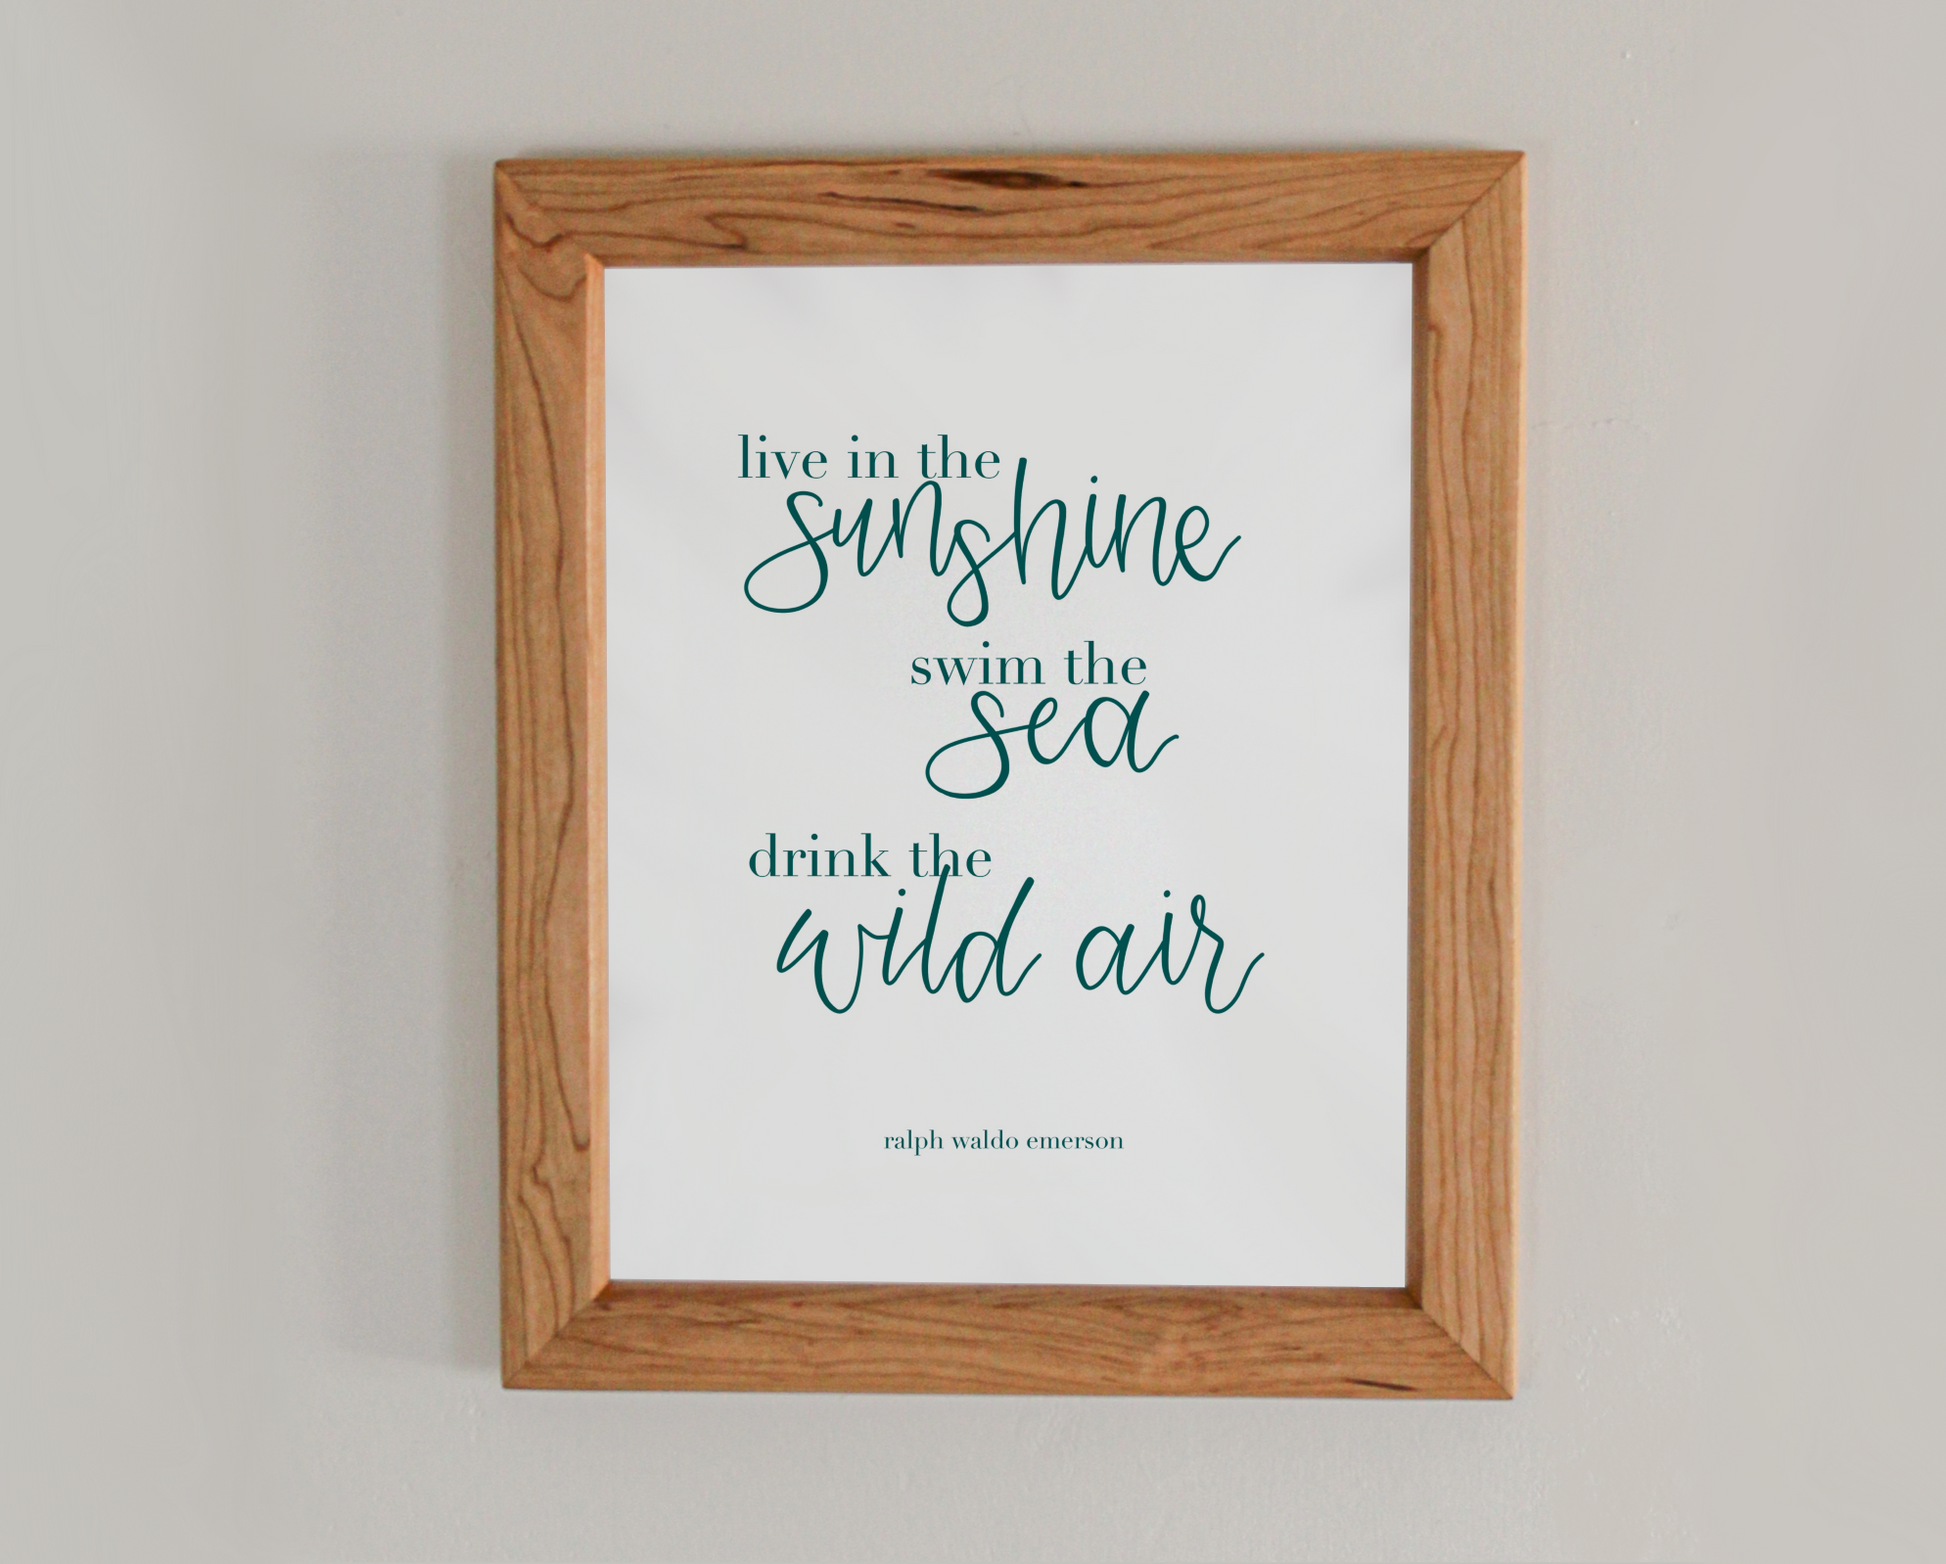 Art print of text from a Ralph Waldo Emerson in a mix of type and calligraphy; quote reads: live in the sunshine, swim in the sea, drink the wild air